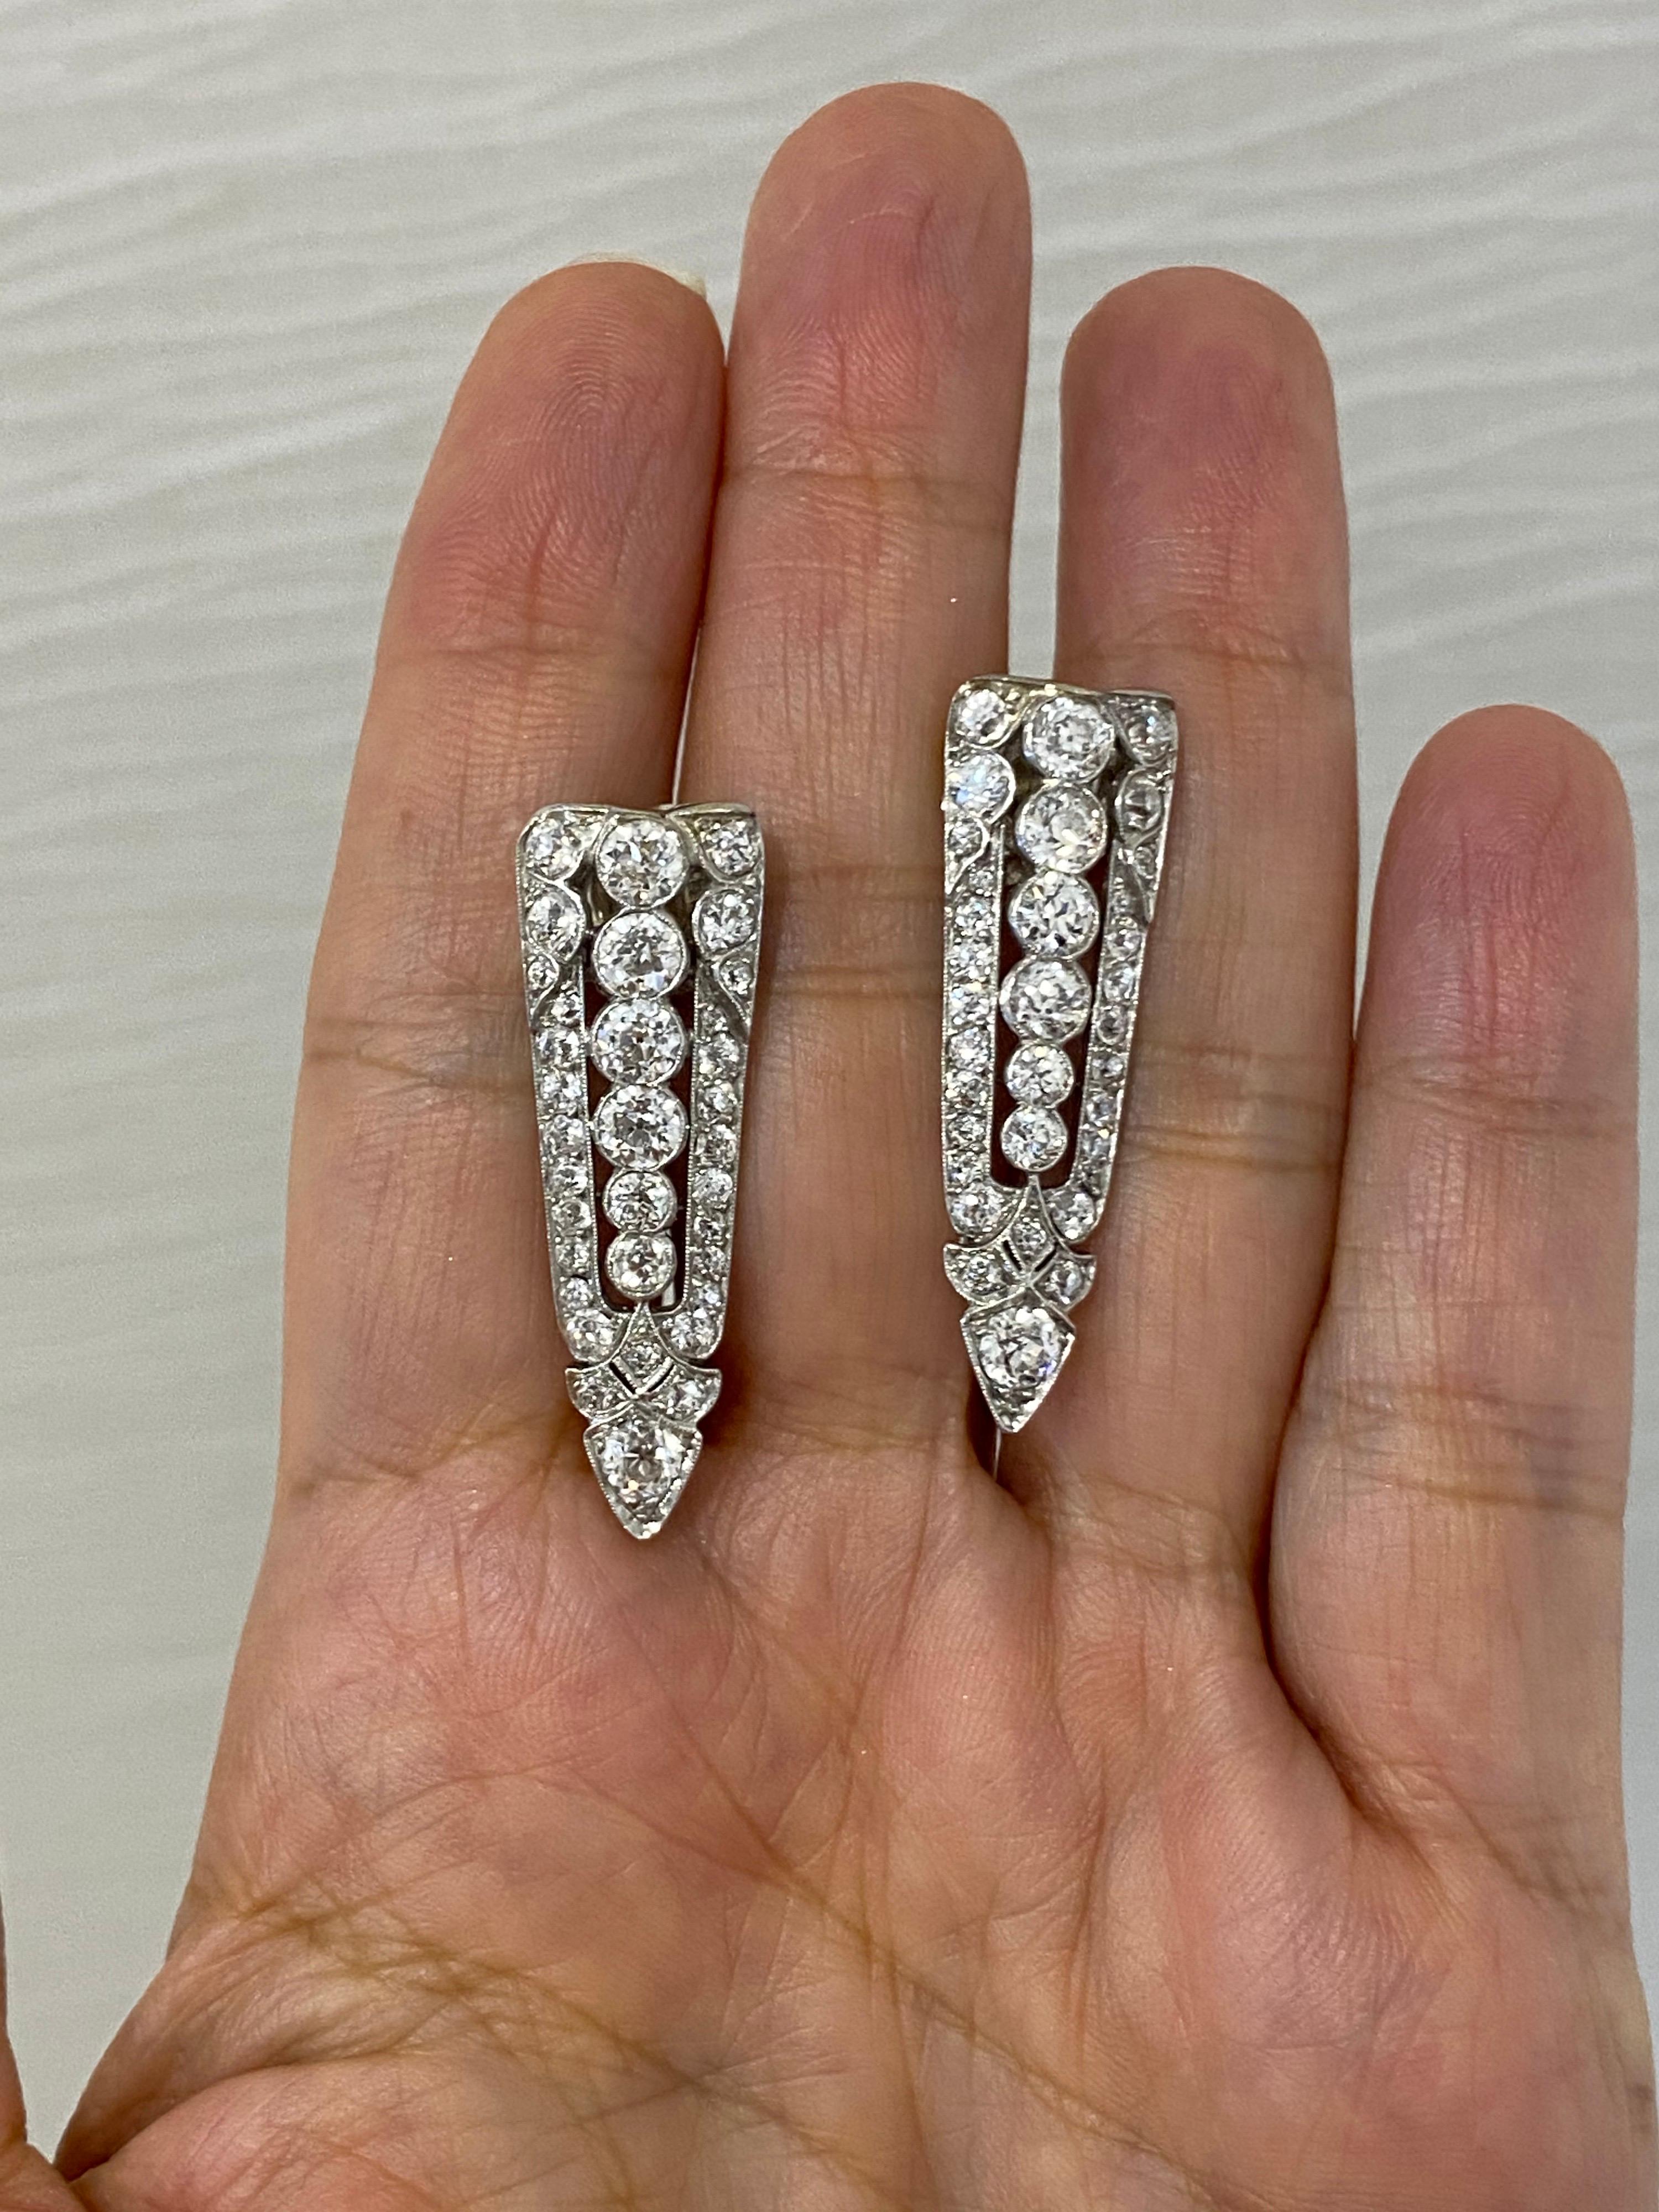 Original Art Deco spear settings. Once Art Deco dress pins. 
Now can be worn and adored noticeably on your ears. Wear them day to 
night, one of a kind and so chic! 
68 old European diamonds =Approx 3.40 CTW
F-G color, VS1-SI1
1-3/8 inch long 
Post